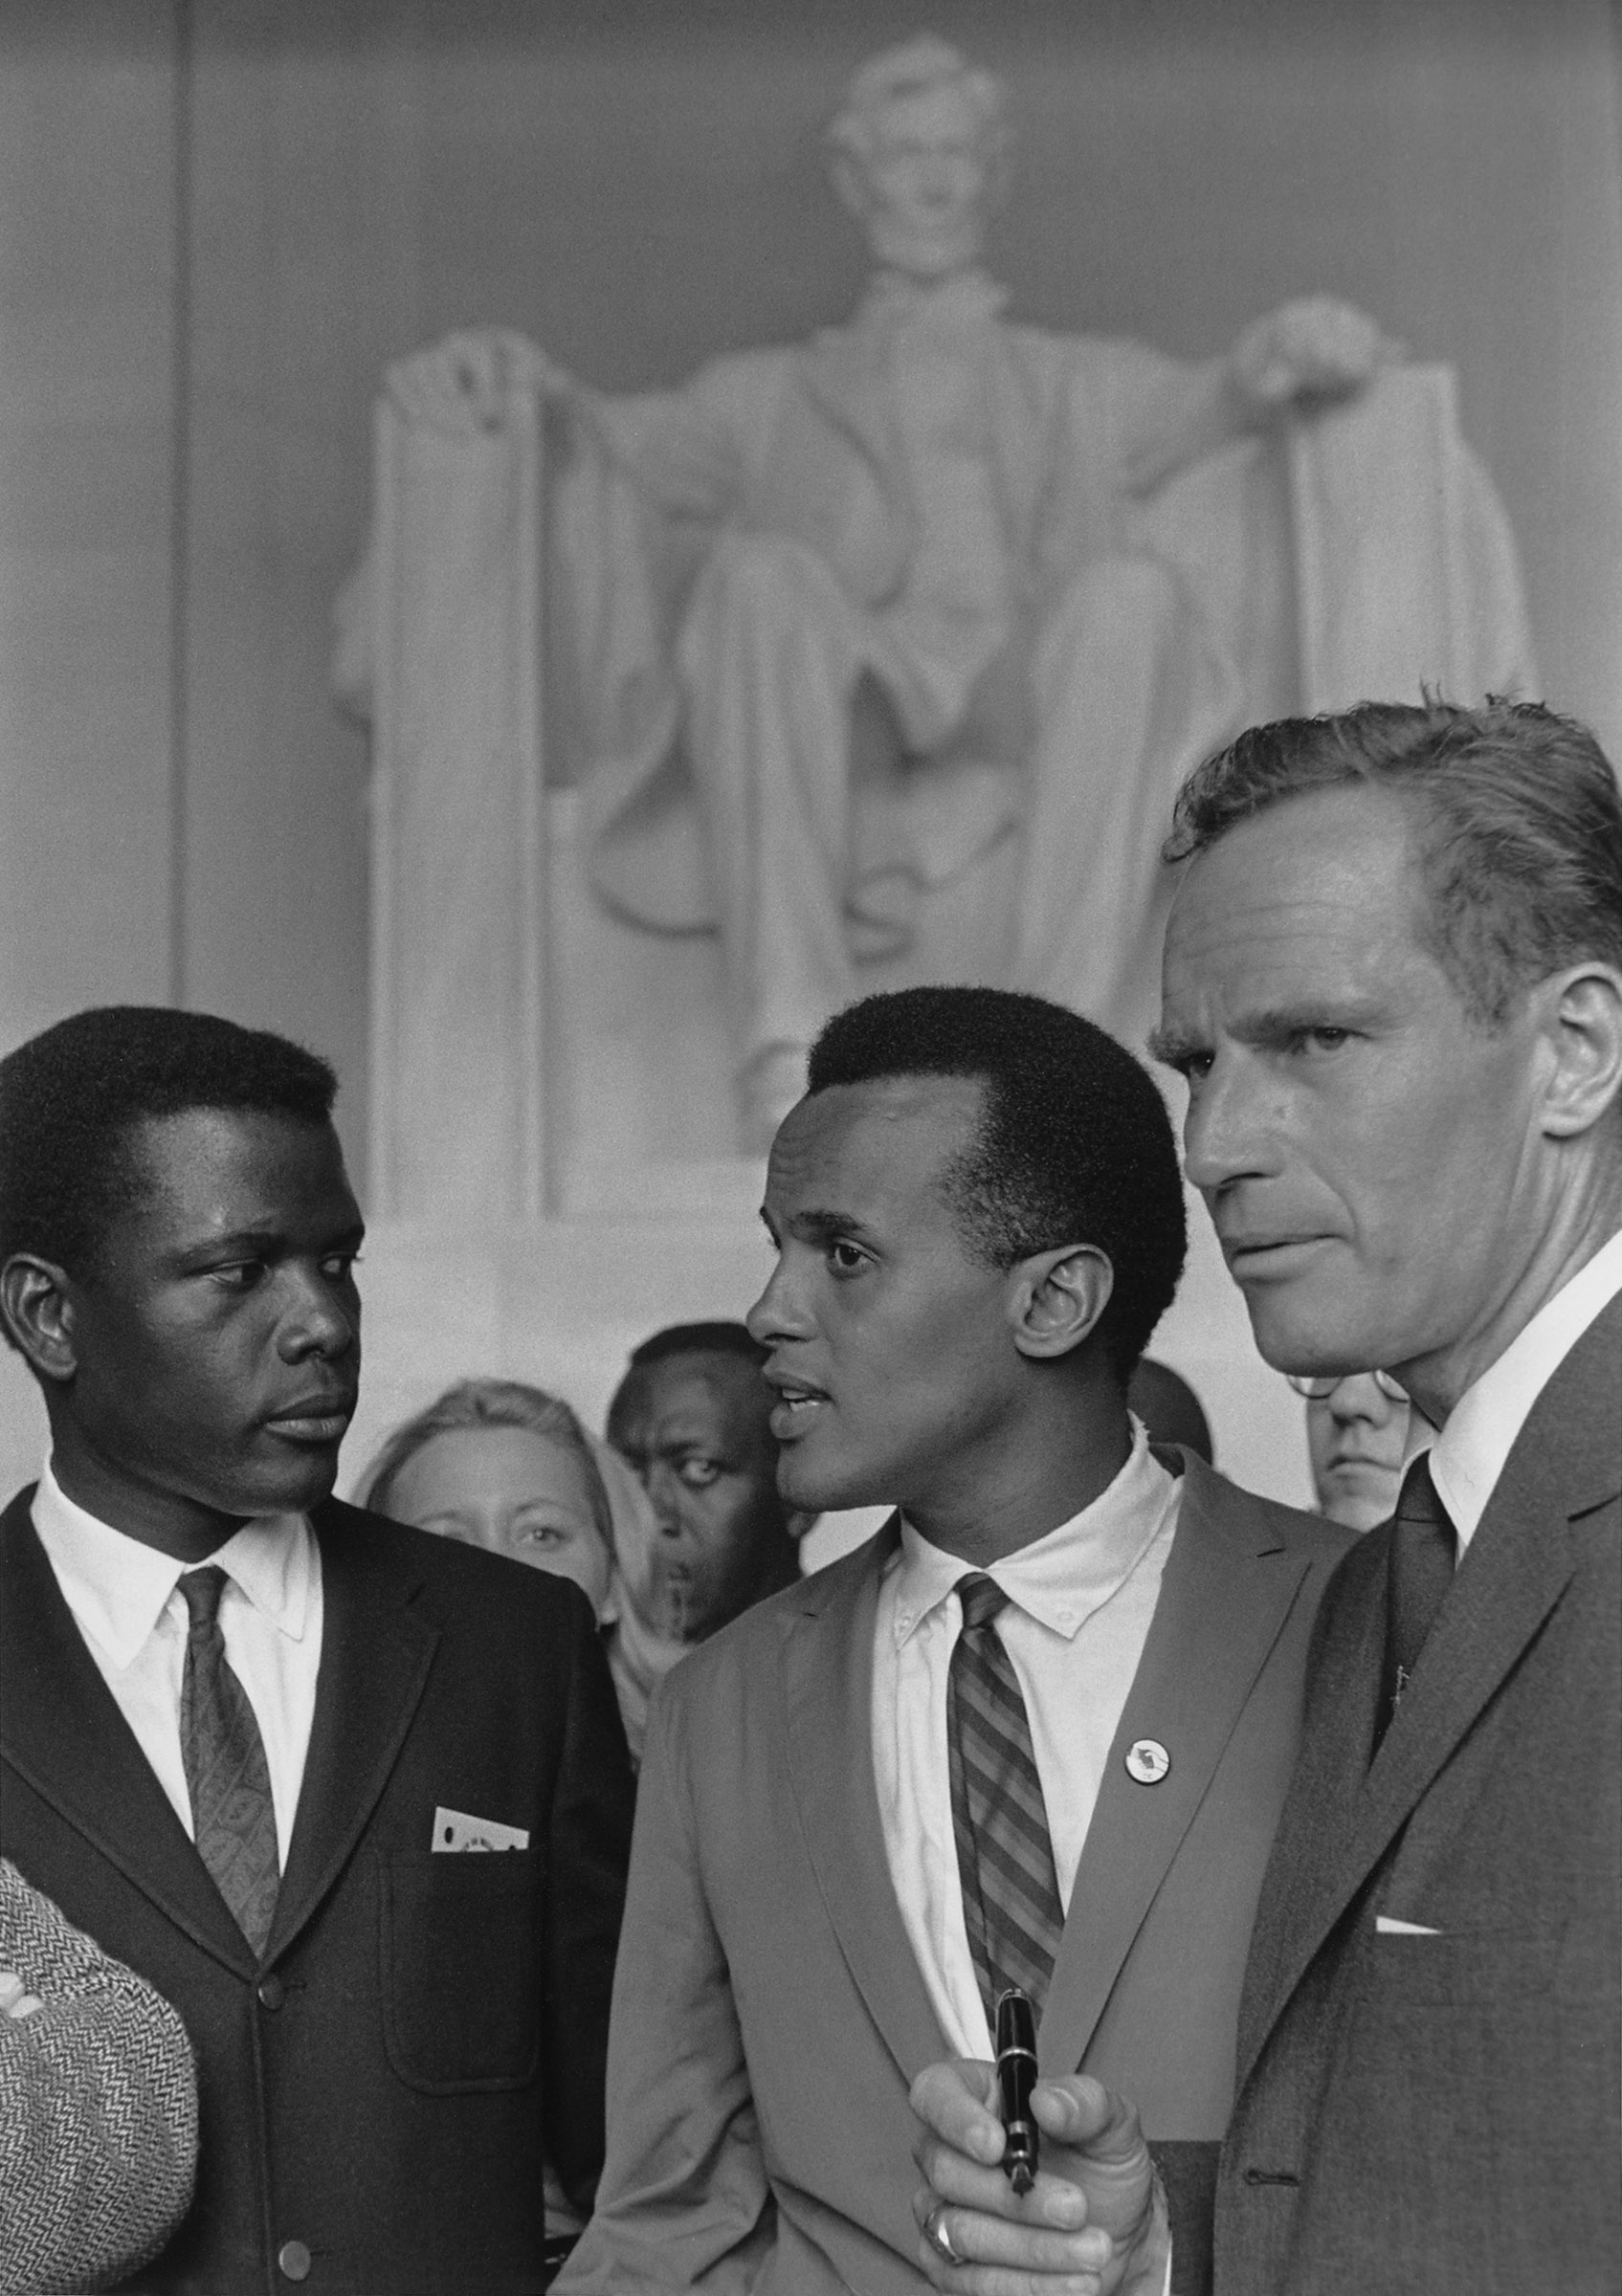 Actors Sidney Poitier, Charlton Heston and singer Harry Belafonte at the 1963 Civil Rights March on Washington. Aug. 28, 1963. (Courtesy Everett Collection)